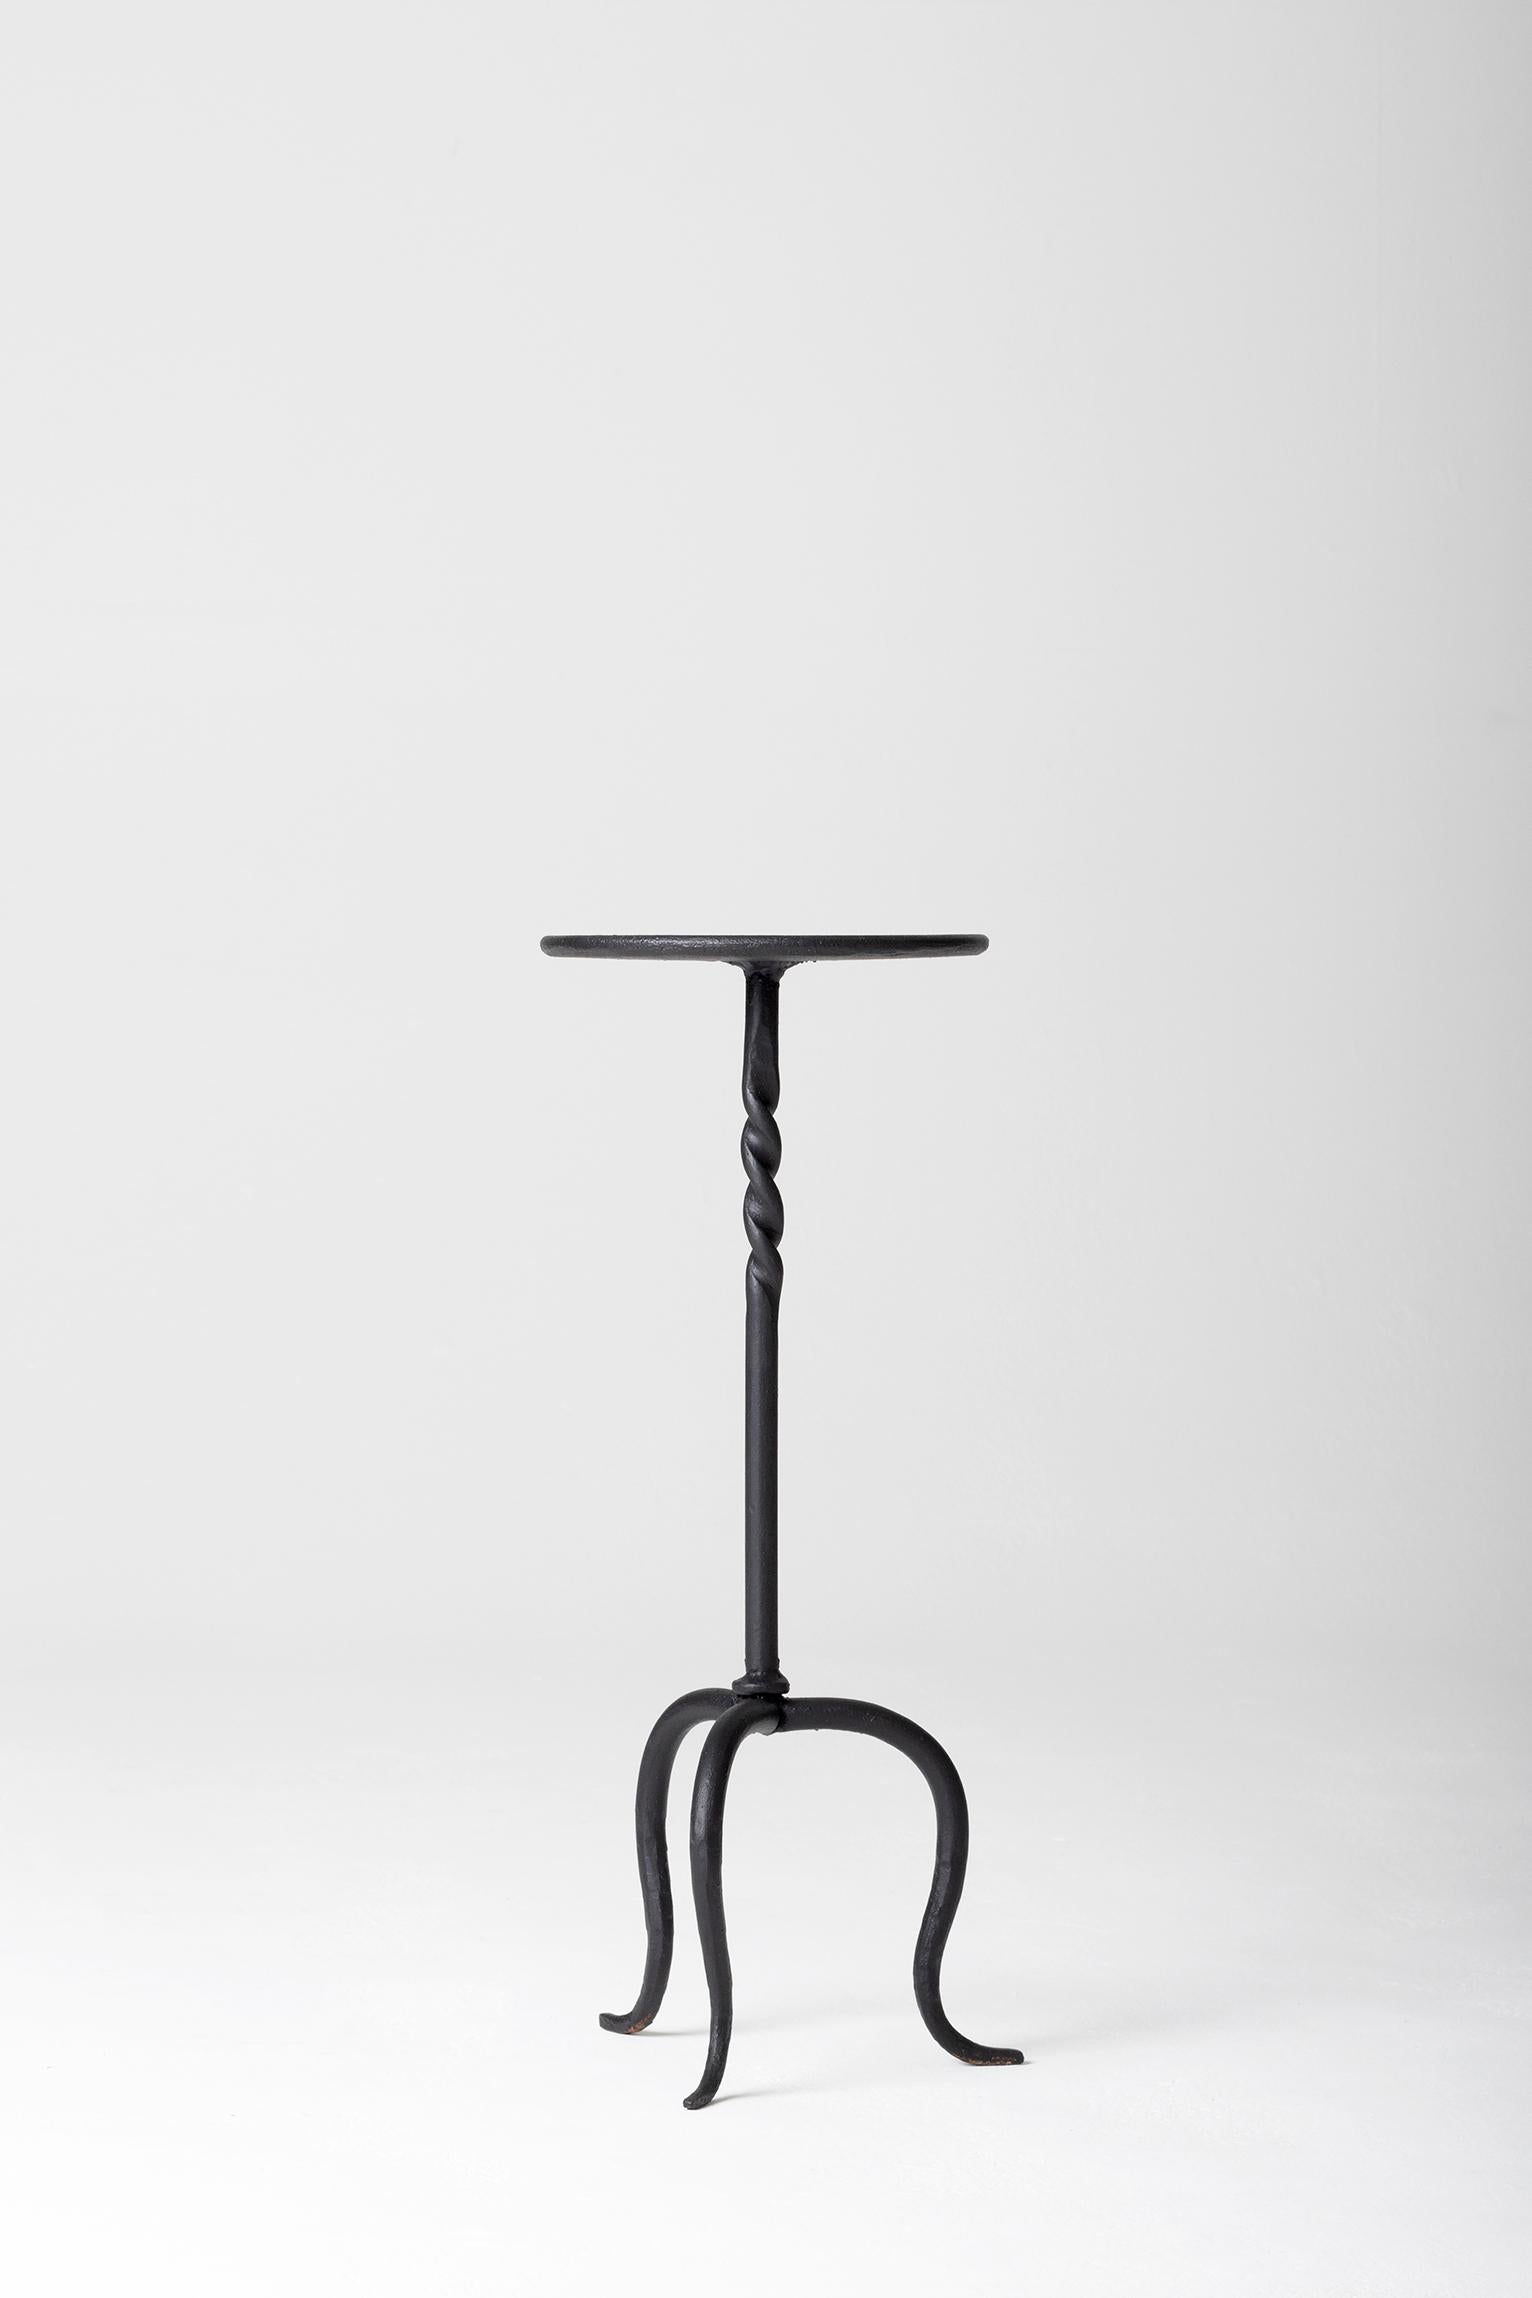 A black patinated wrought iron martini table
Spain, second half of the 20th century.